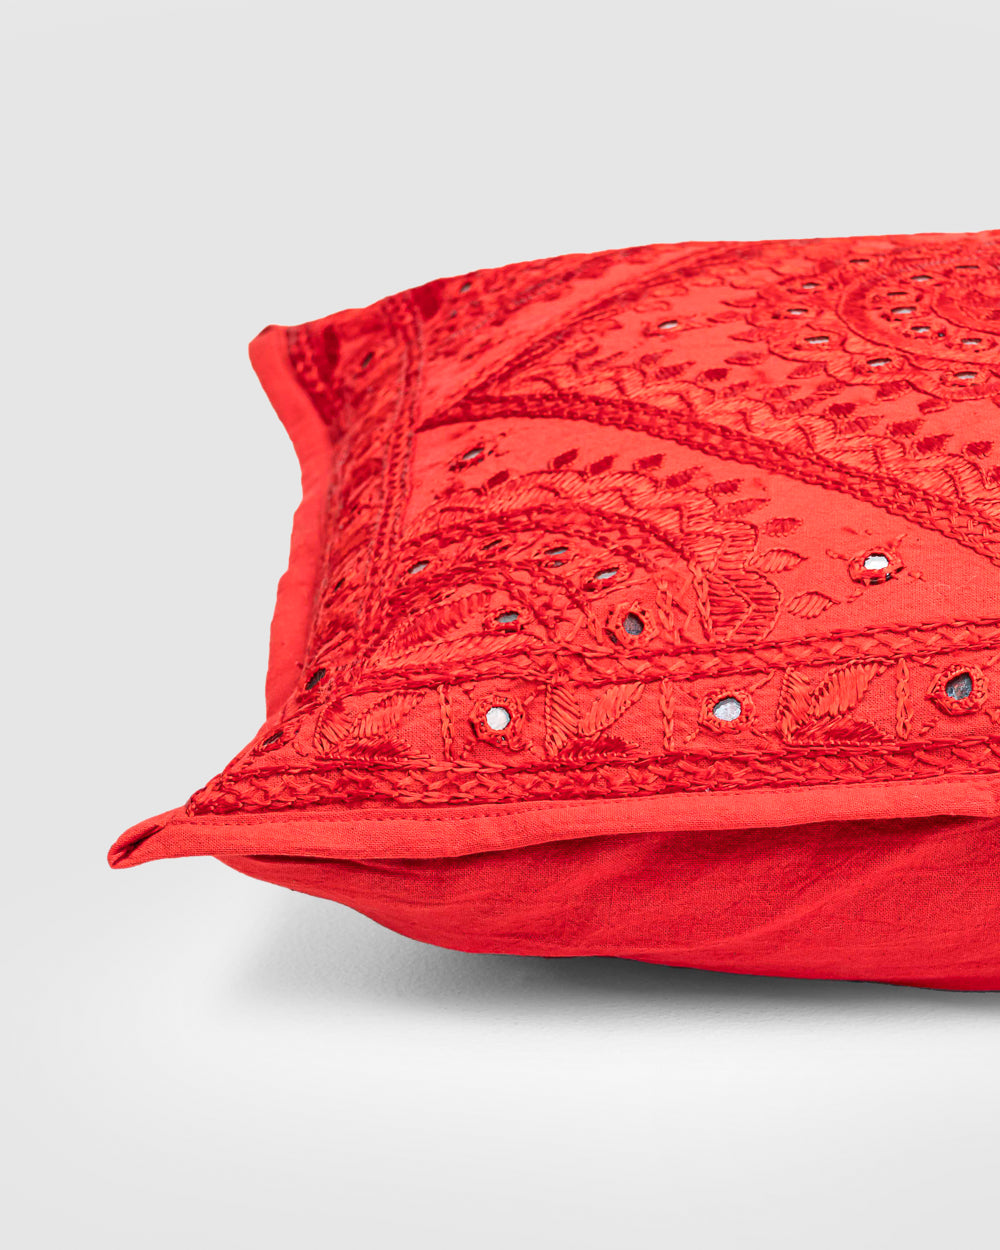 Cushion Cover Heavy Embroidery & Mirror-work, Red